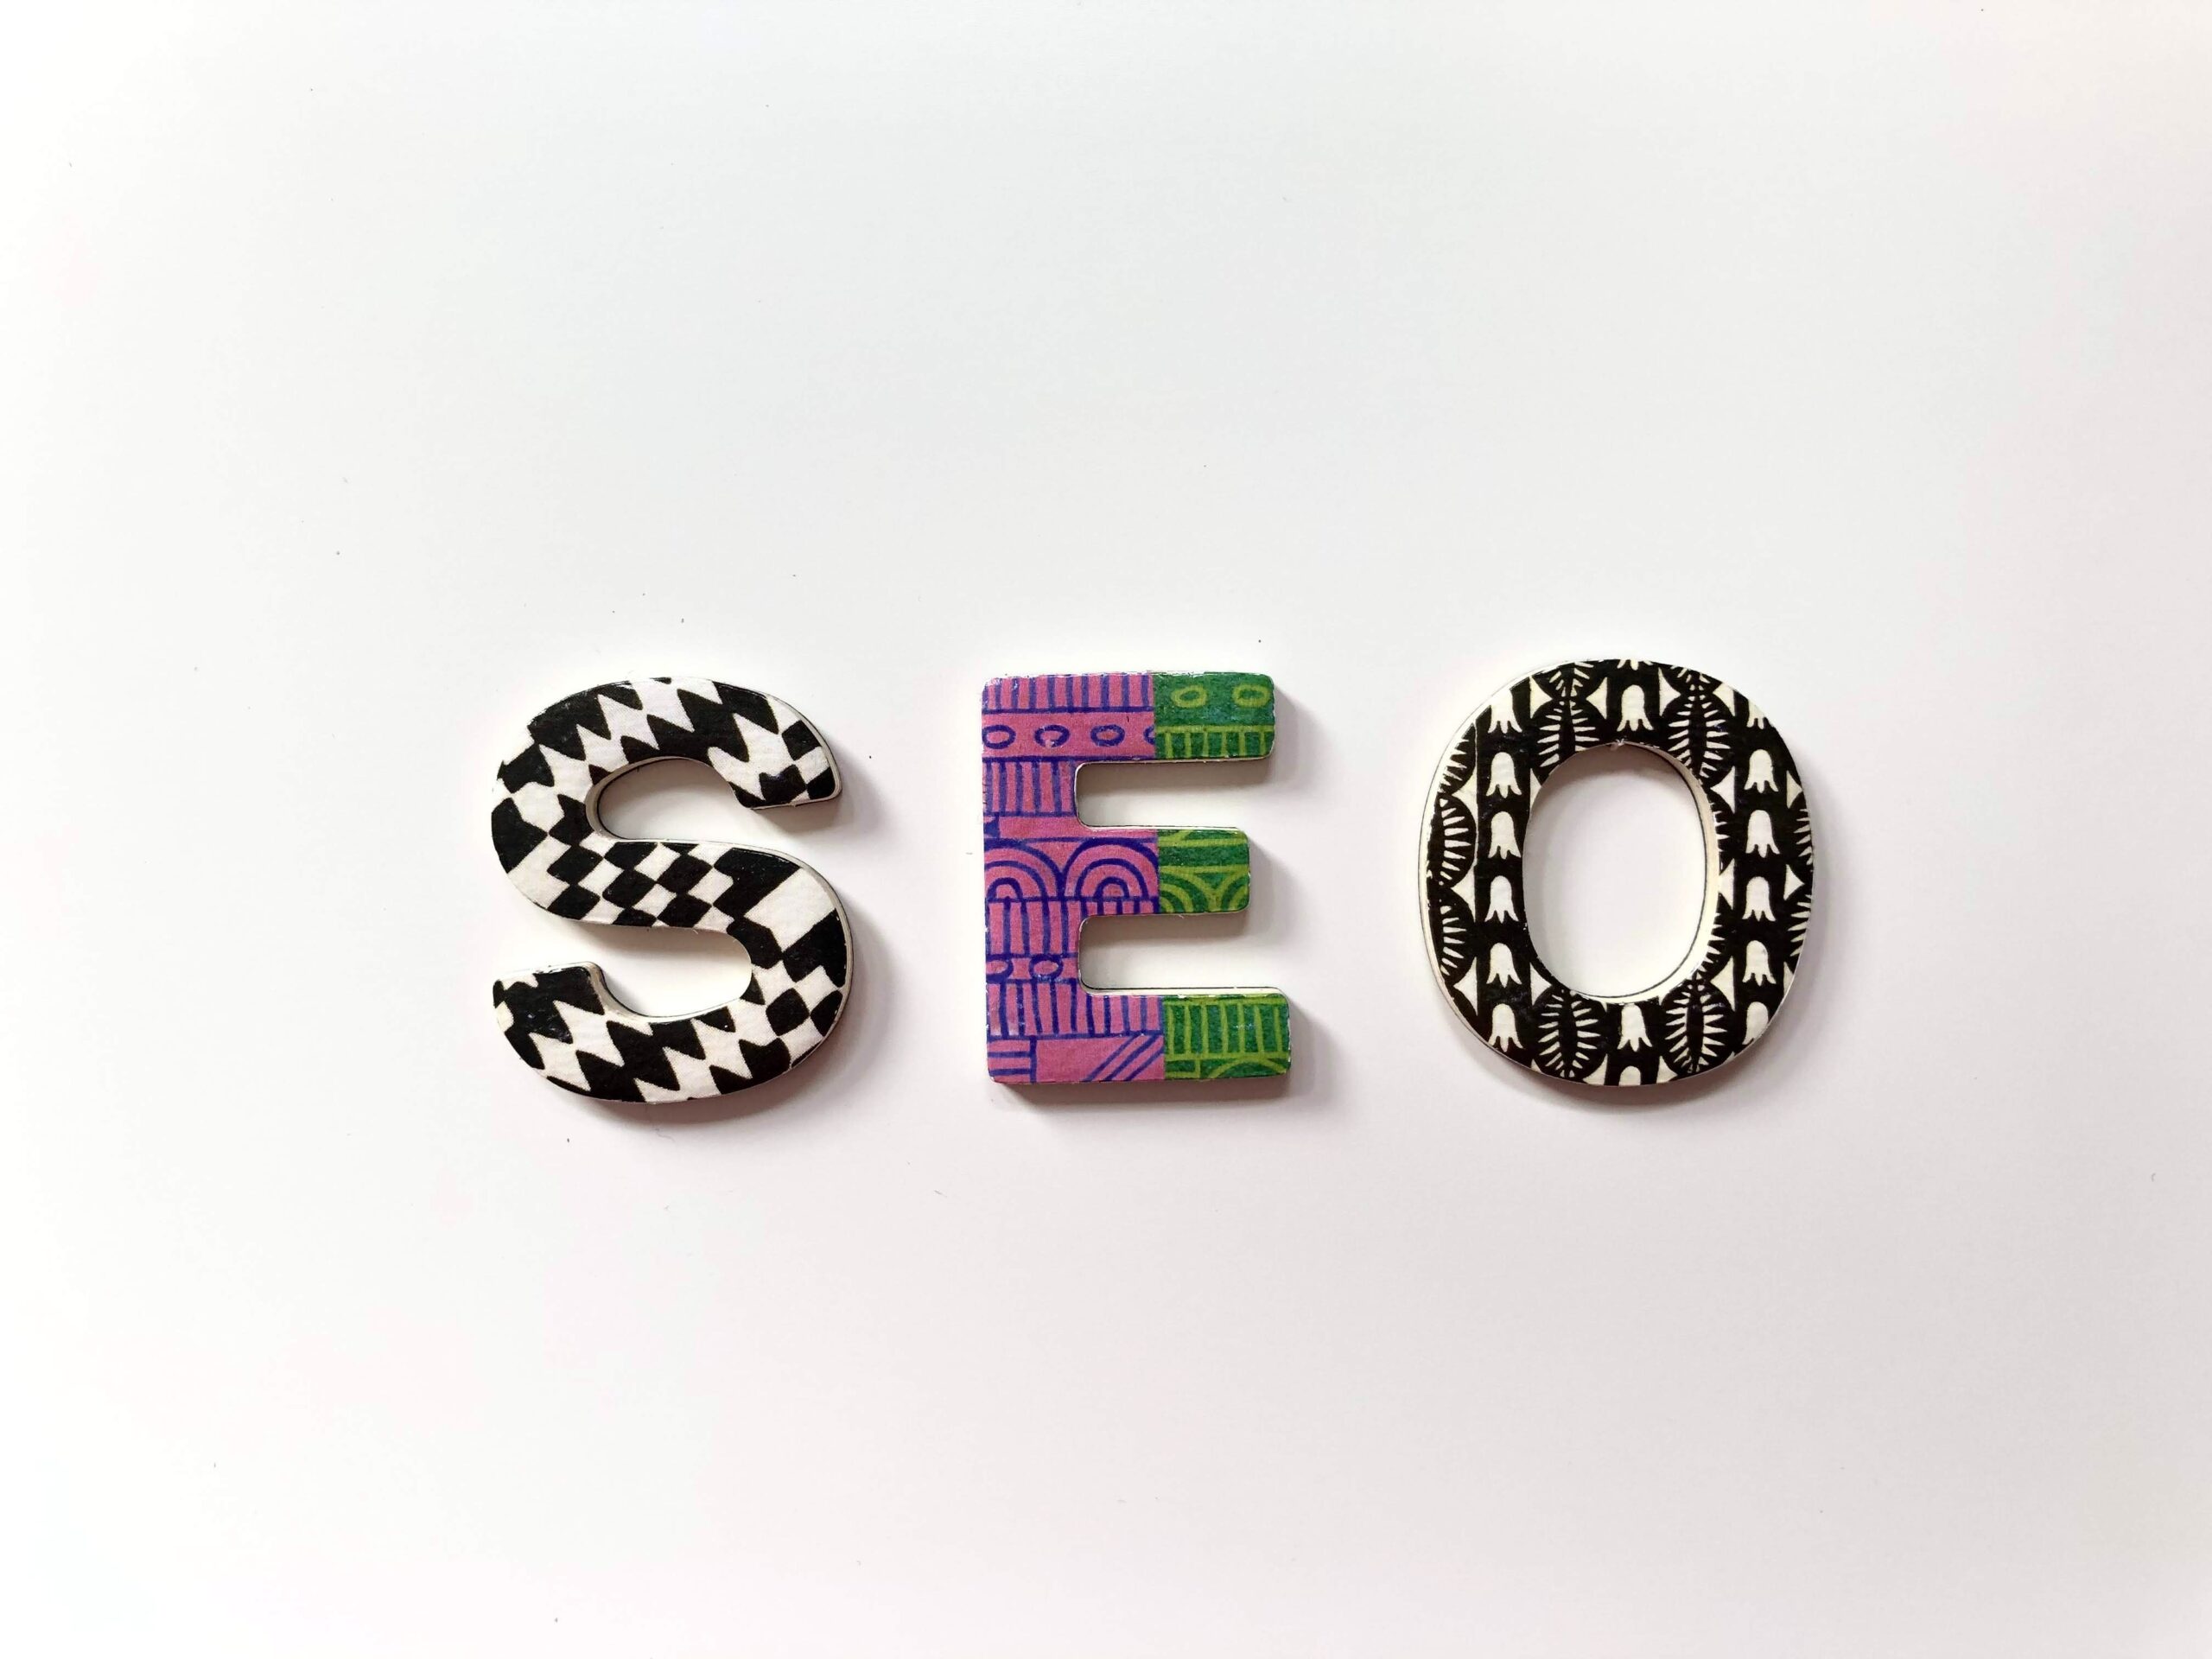 How Much Does SEO Cost For Small Businesses?